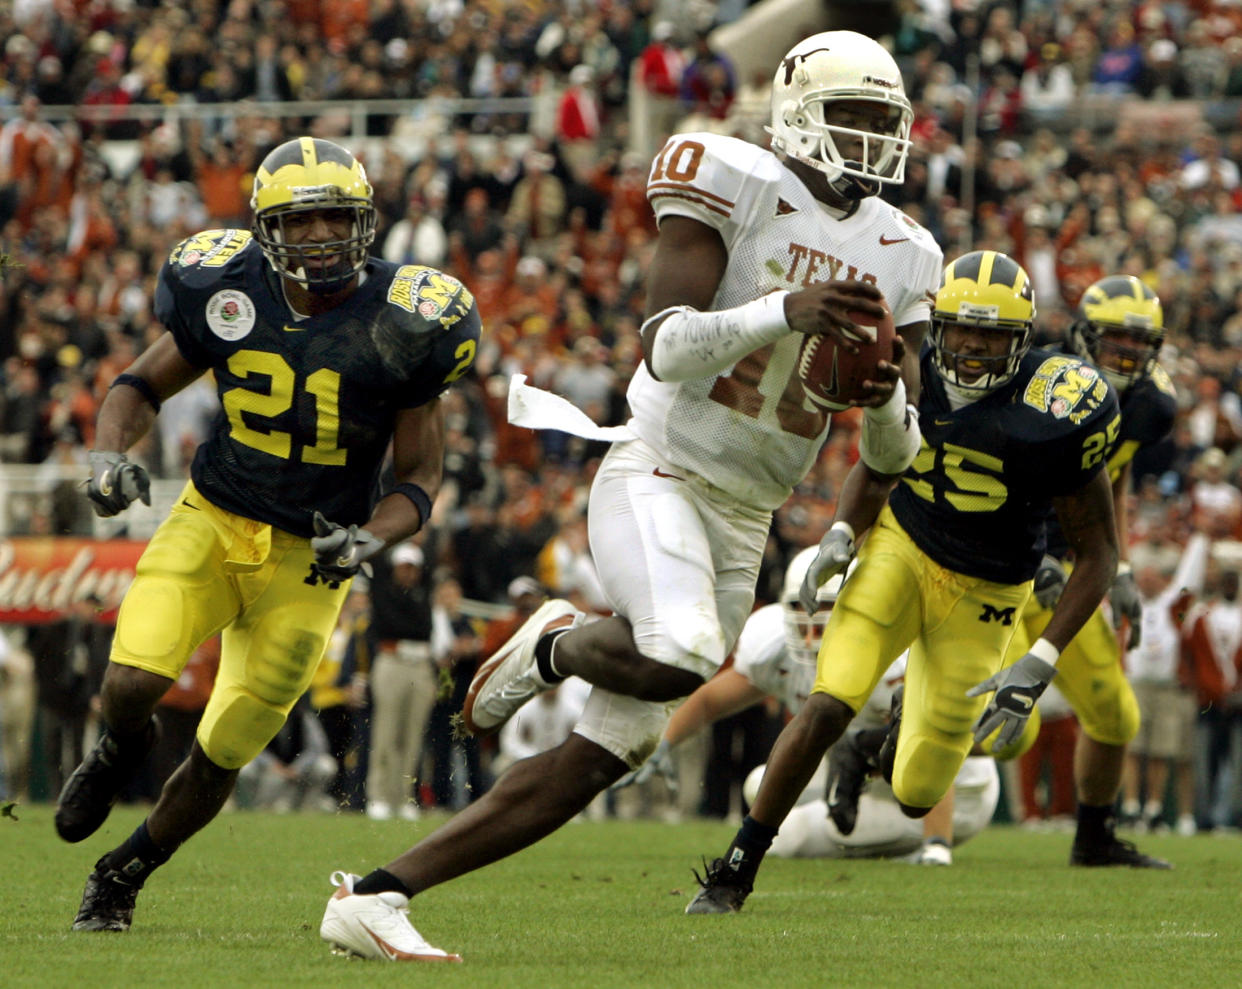 Texas Longhorns quarterback Vince Young (10) sprints 20 yards past Michigan Wolverines free safety Ryan Mundy (L) and safety Ernest Shazor for a touchdown, during the first quarter of the 91st annual Rose Bowl game in Pasadena, California January 1, 2005. REUTERS/Robert Galbraith  RG